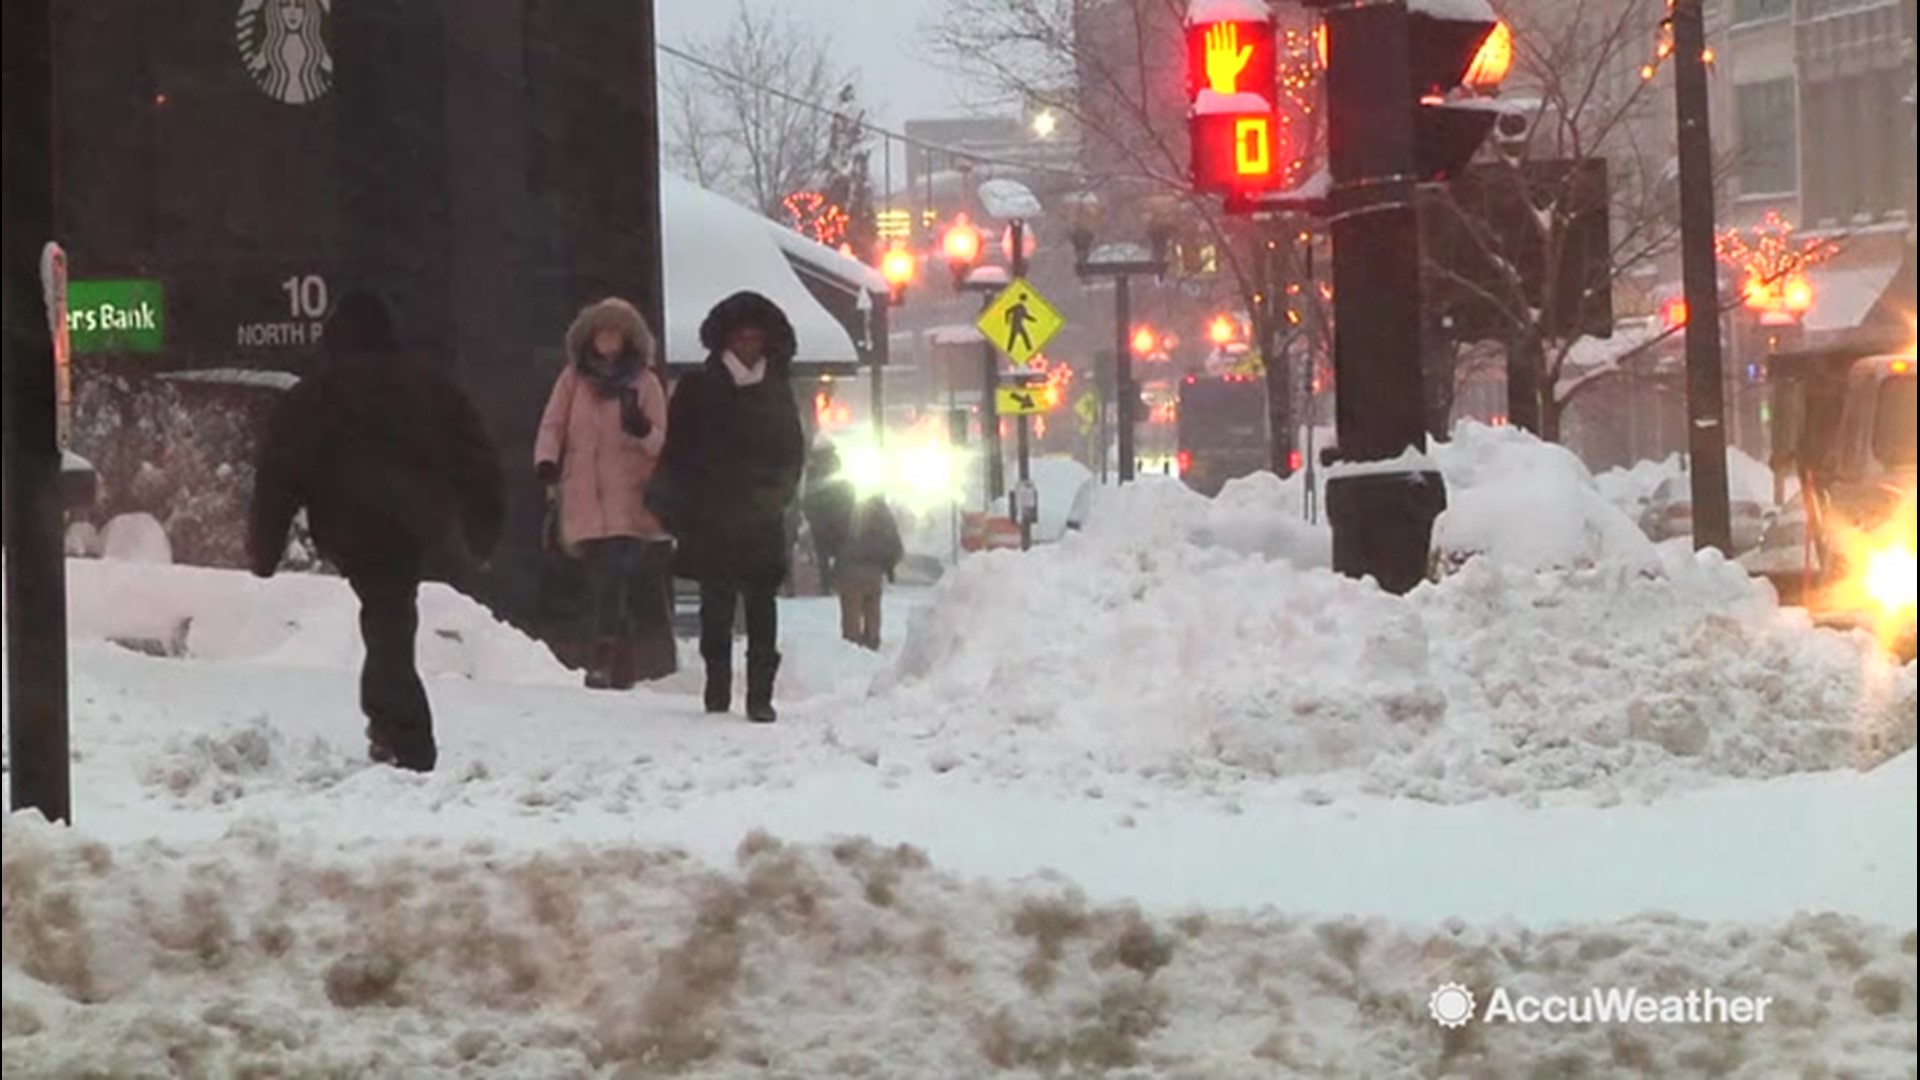 A doozy of a snowstorm hits Albany, and residents are feeling ok so far